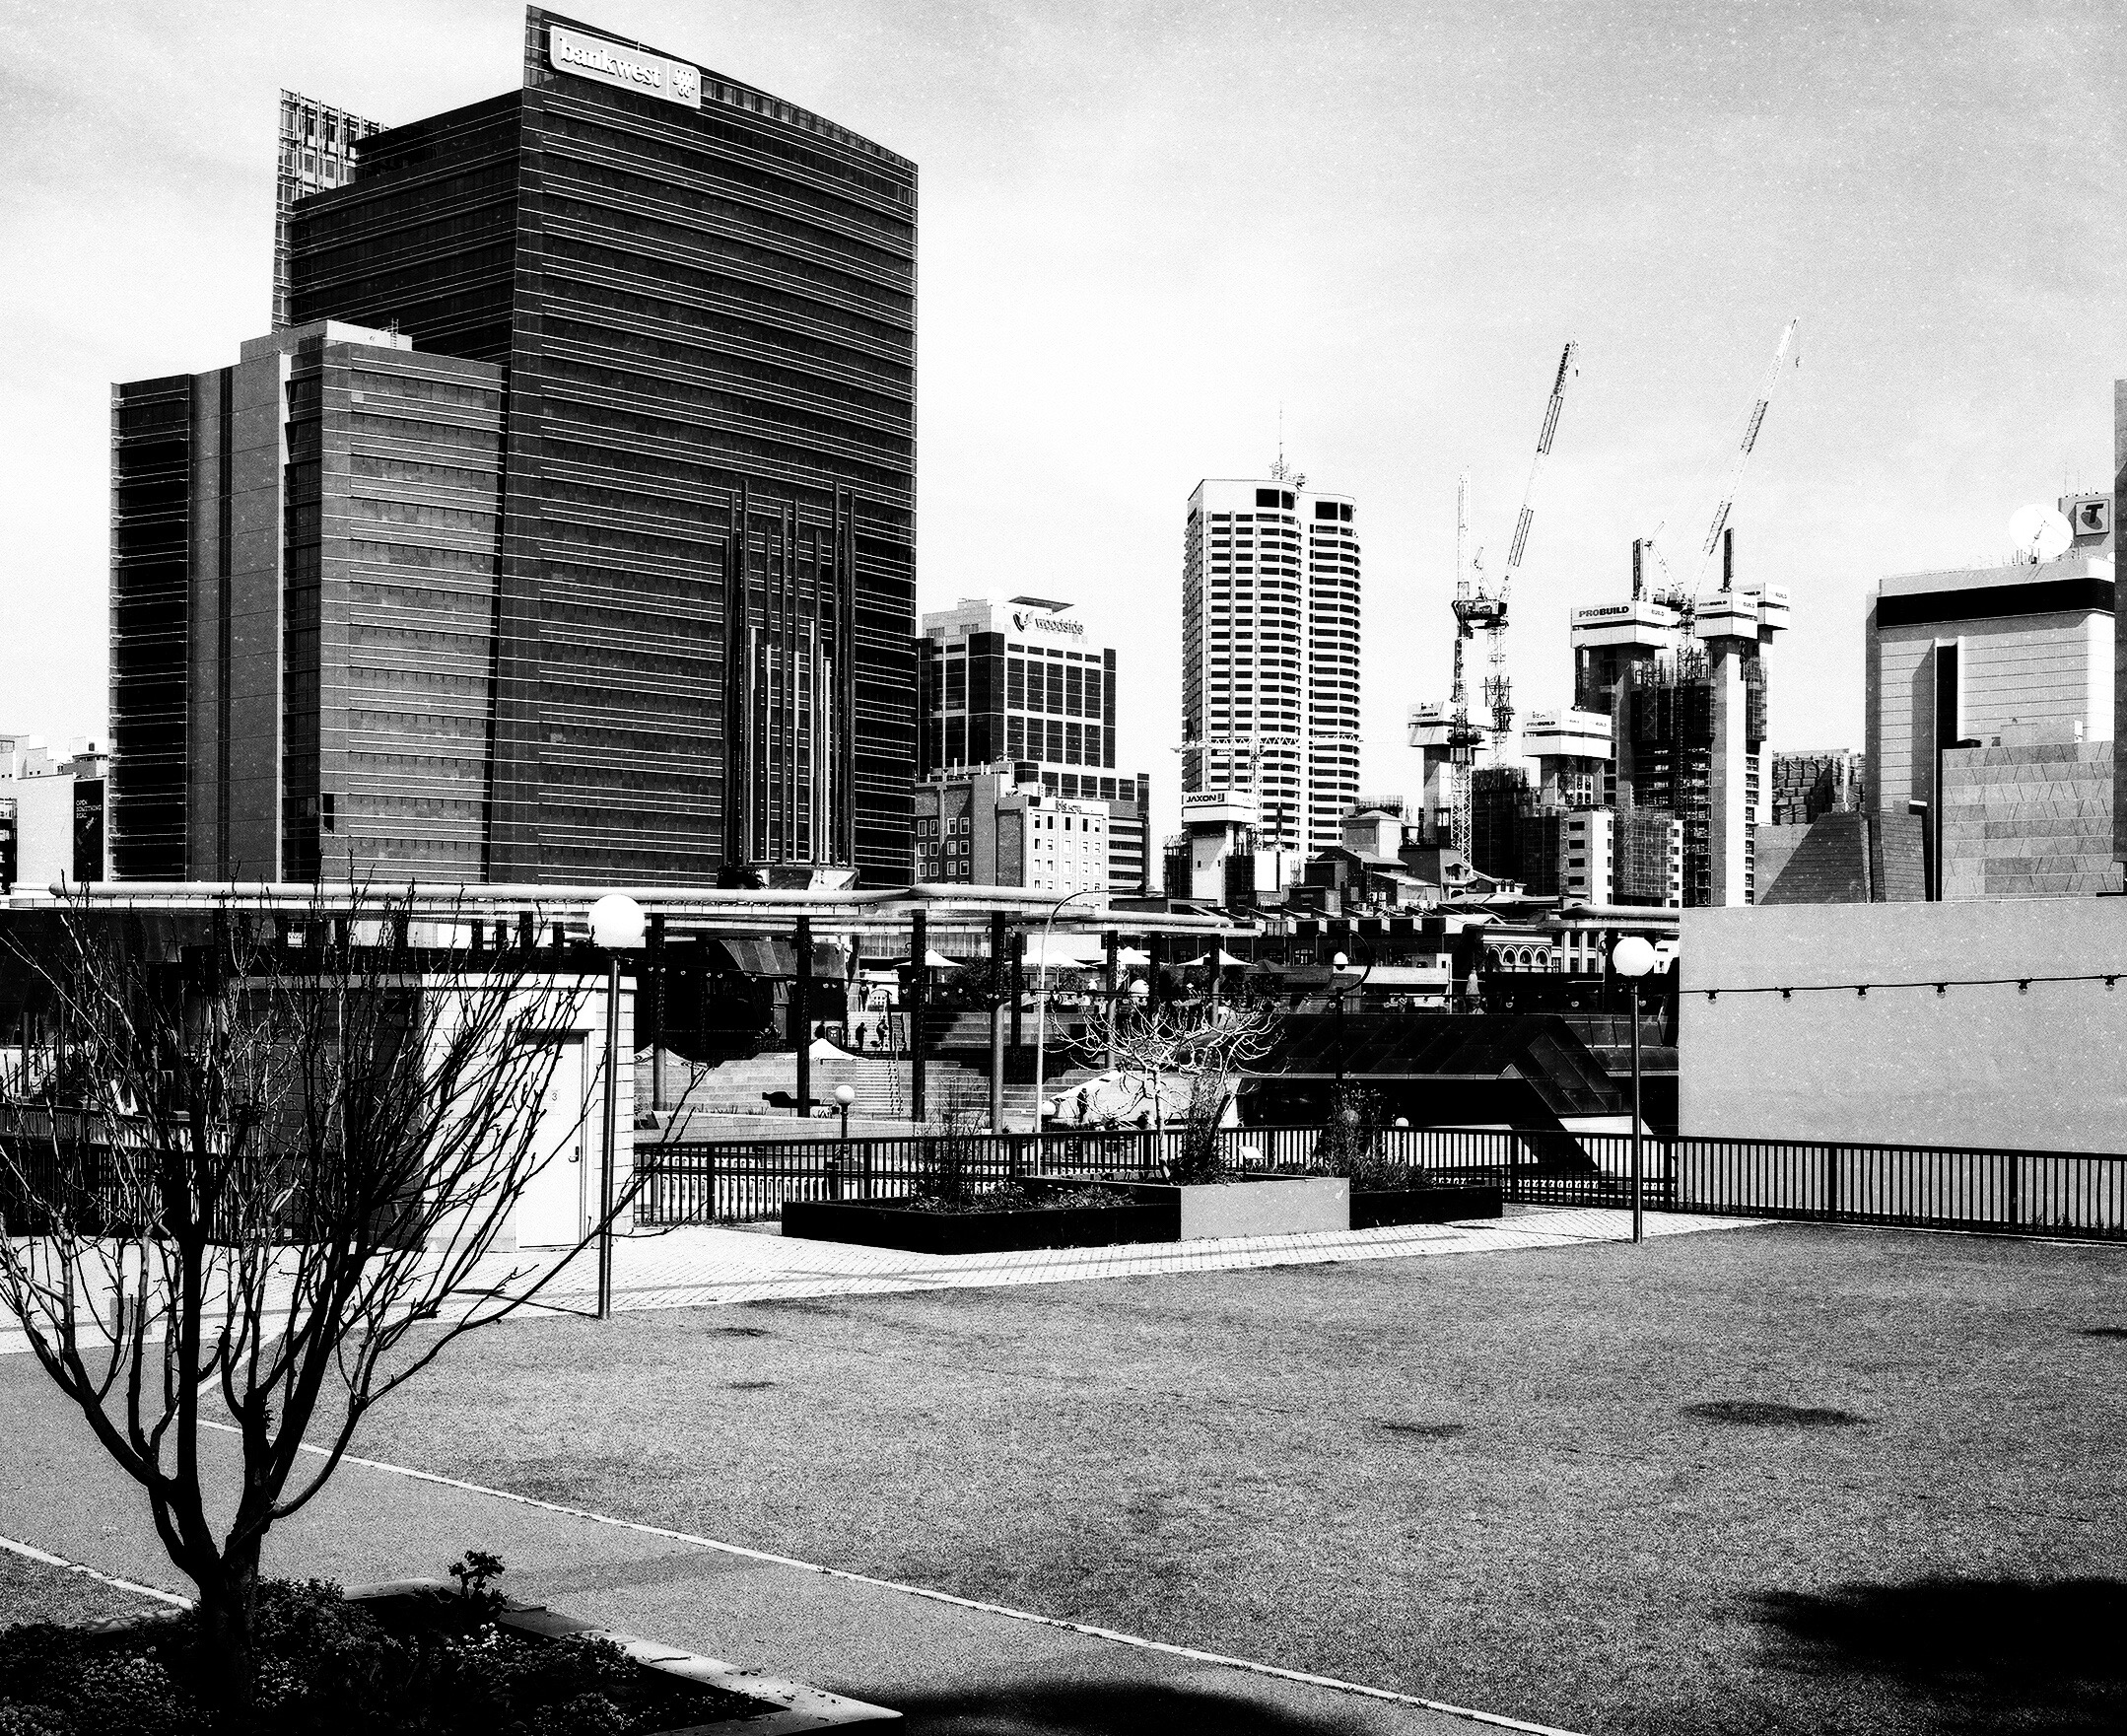 View of Bankwest Place from Perth Cultural. Taken in December 2018, with Mamiya 7ii and 80mm lens, and Kodak T-Max 100 120 film